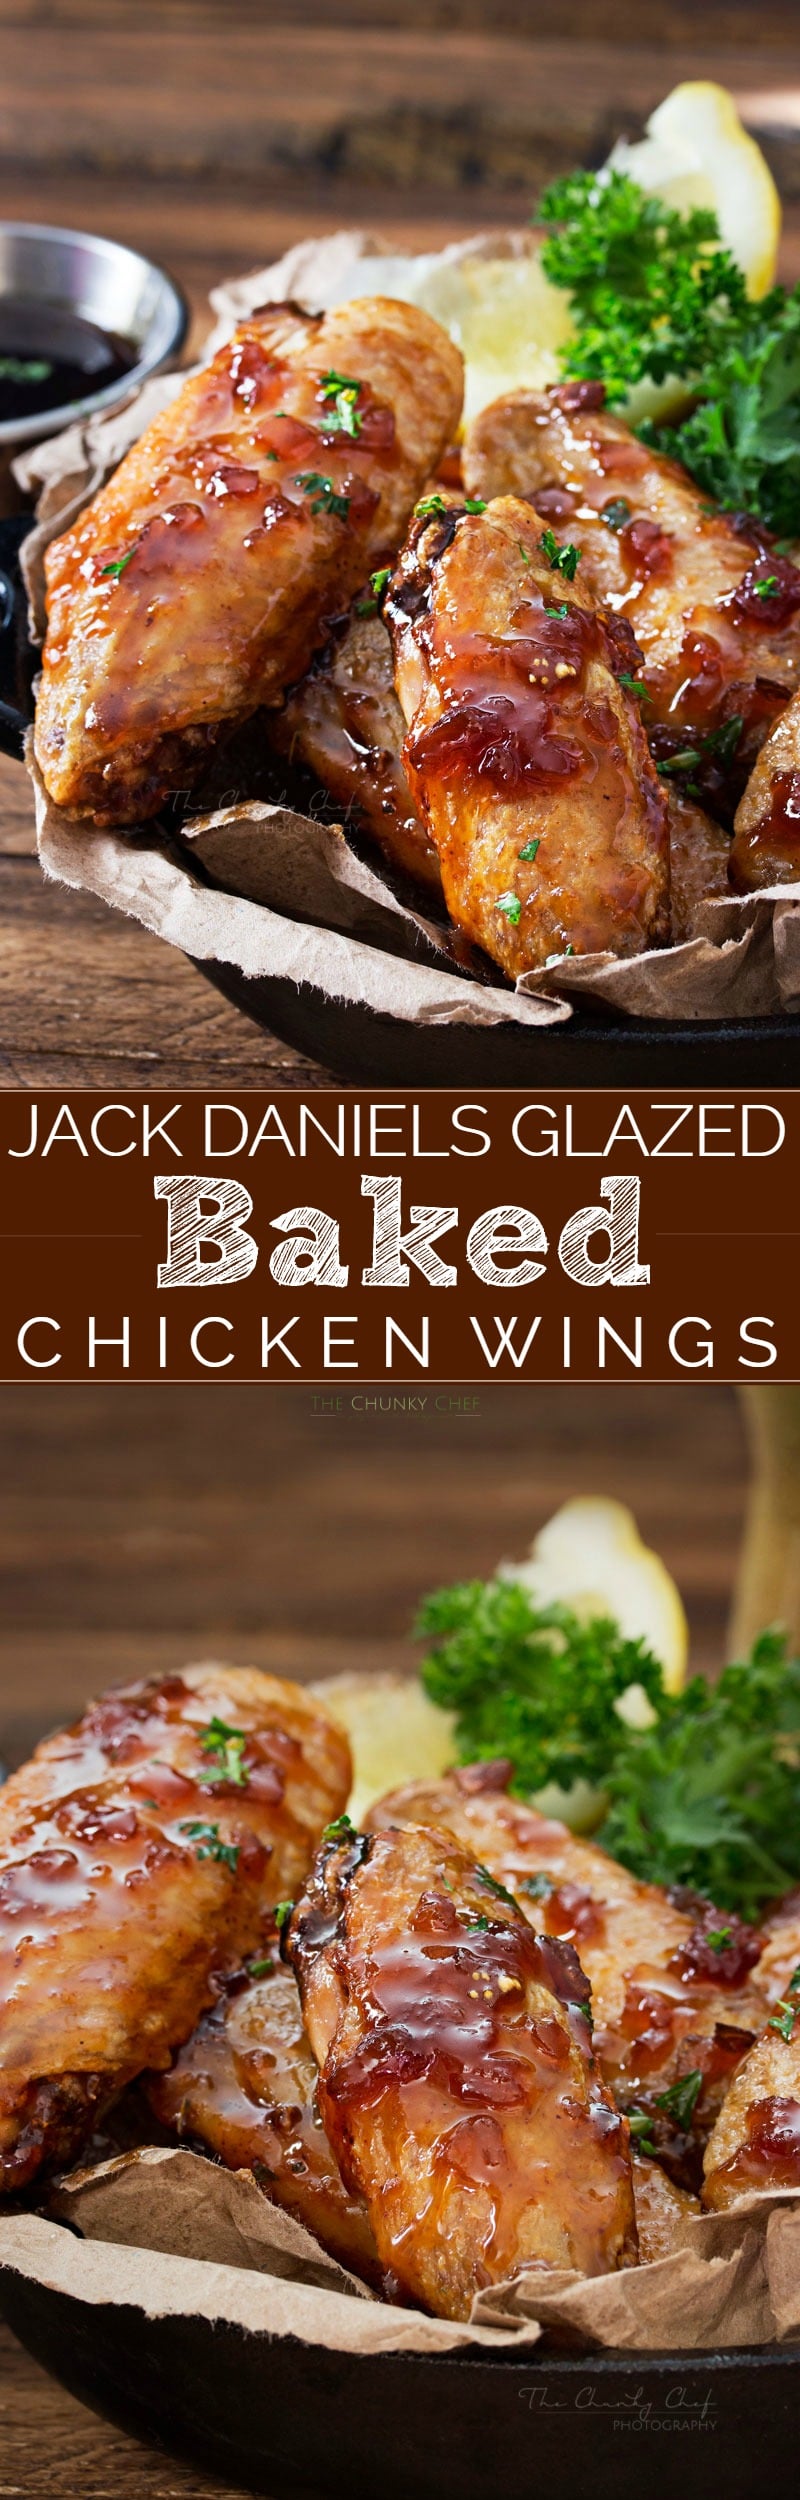 Jack Daniels Glazed Baked Chicken Wings | No need to fry... these baked chicken wings are SUPER crispy! Coated in a flavor-packed copycat Jack Daniels sauce, they're the perfect appetizer! | http://thechunkychef.com